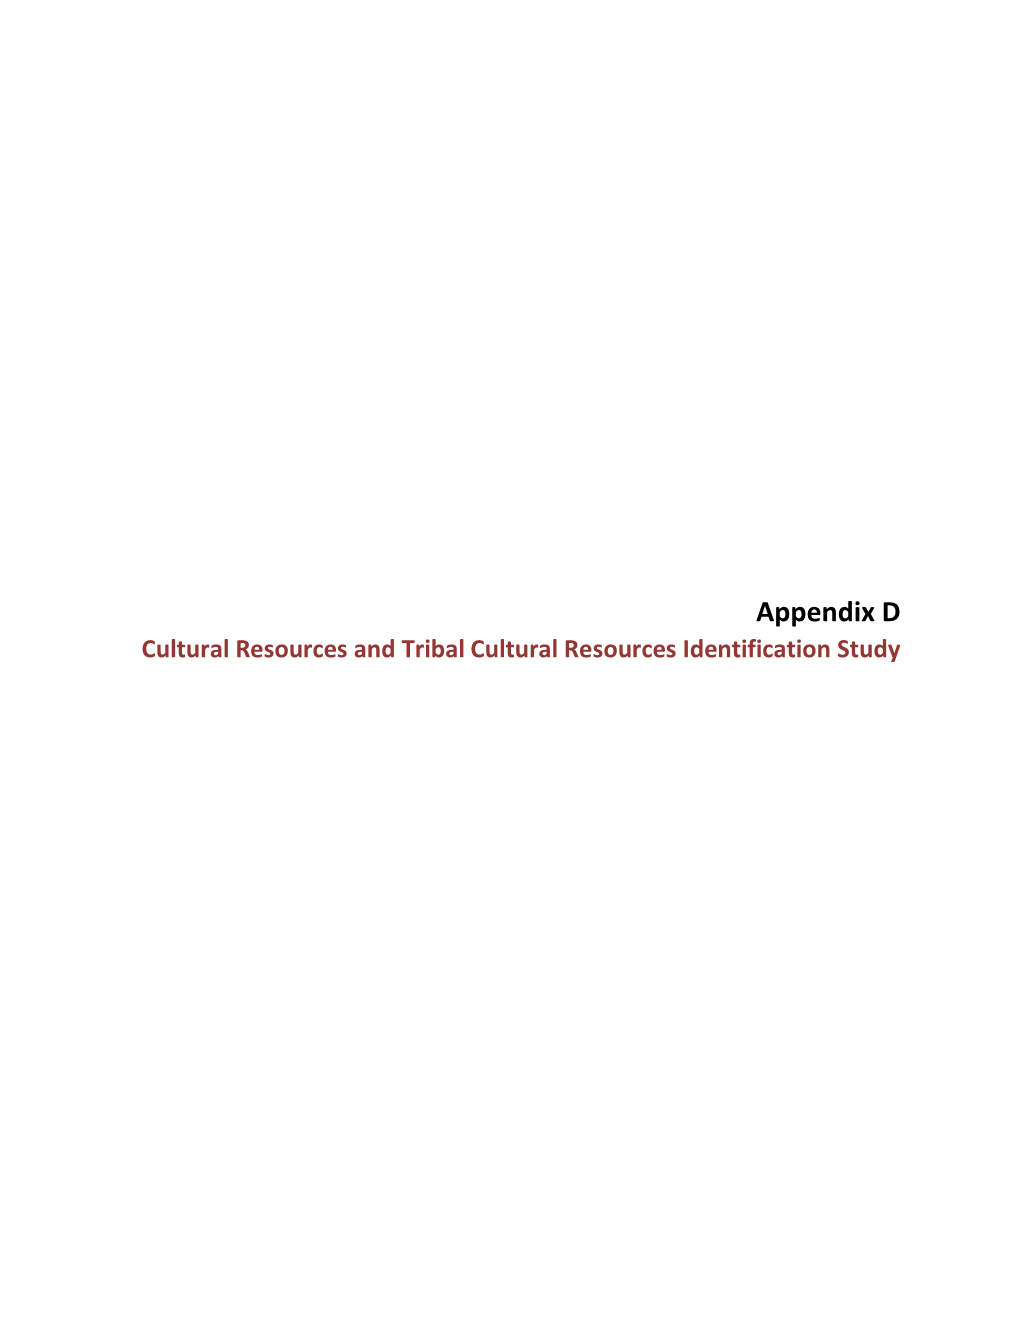 Appendix D Cultural Resources and Tribal Cultural Resources Identification Study